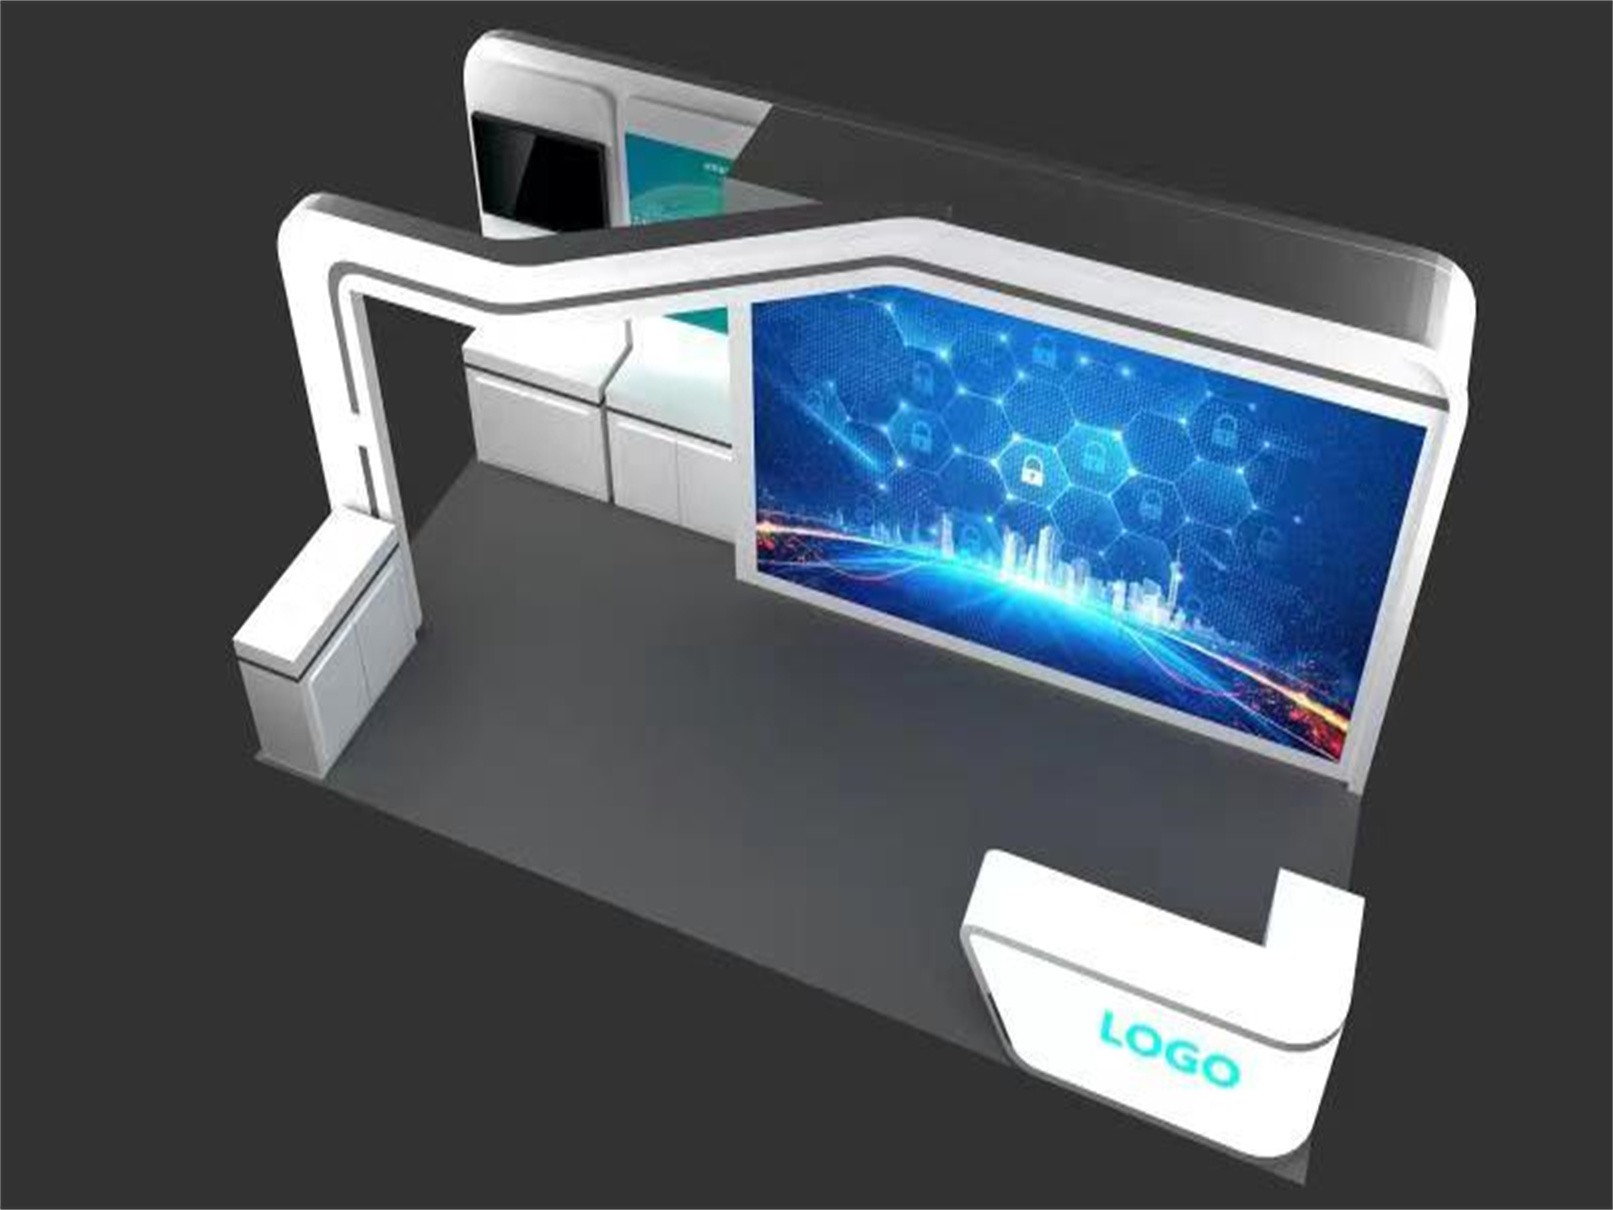 R33 10 039 X 20 039 Custom Trade Show Booth With Led Video Wall